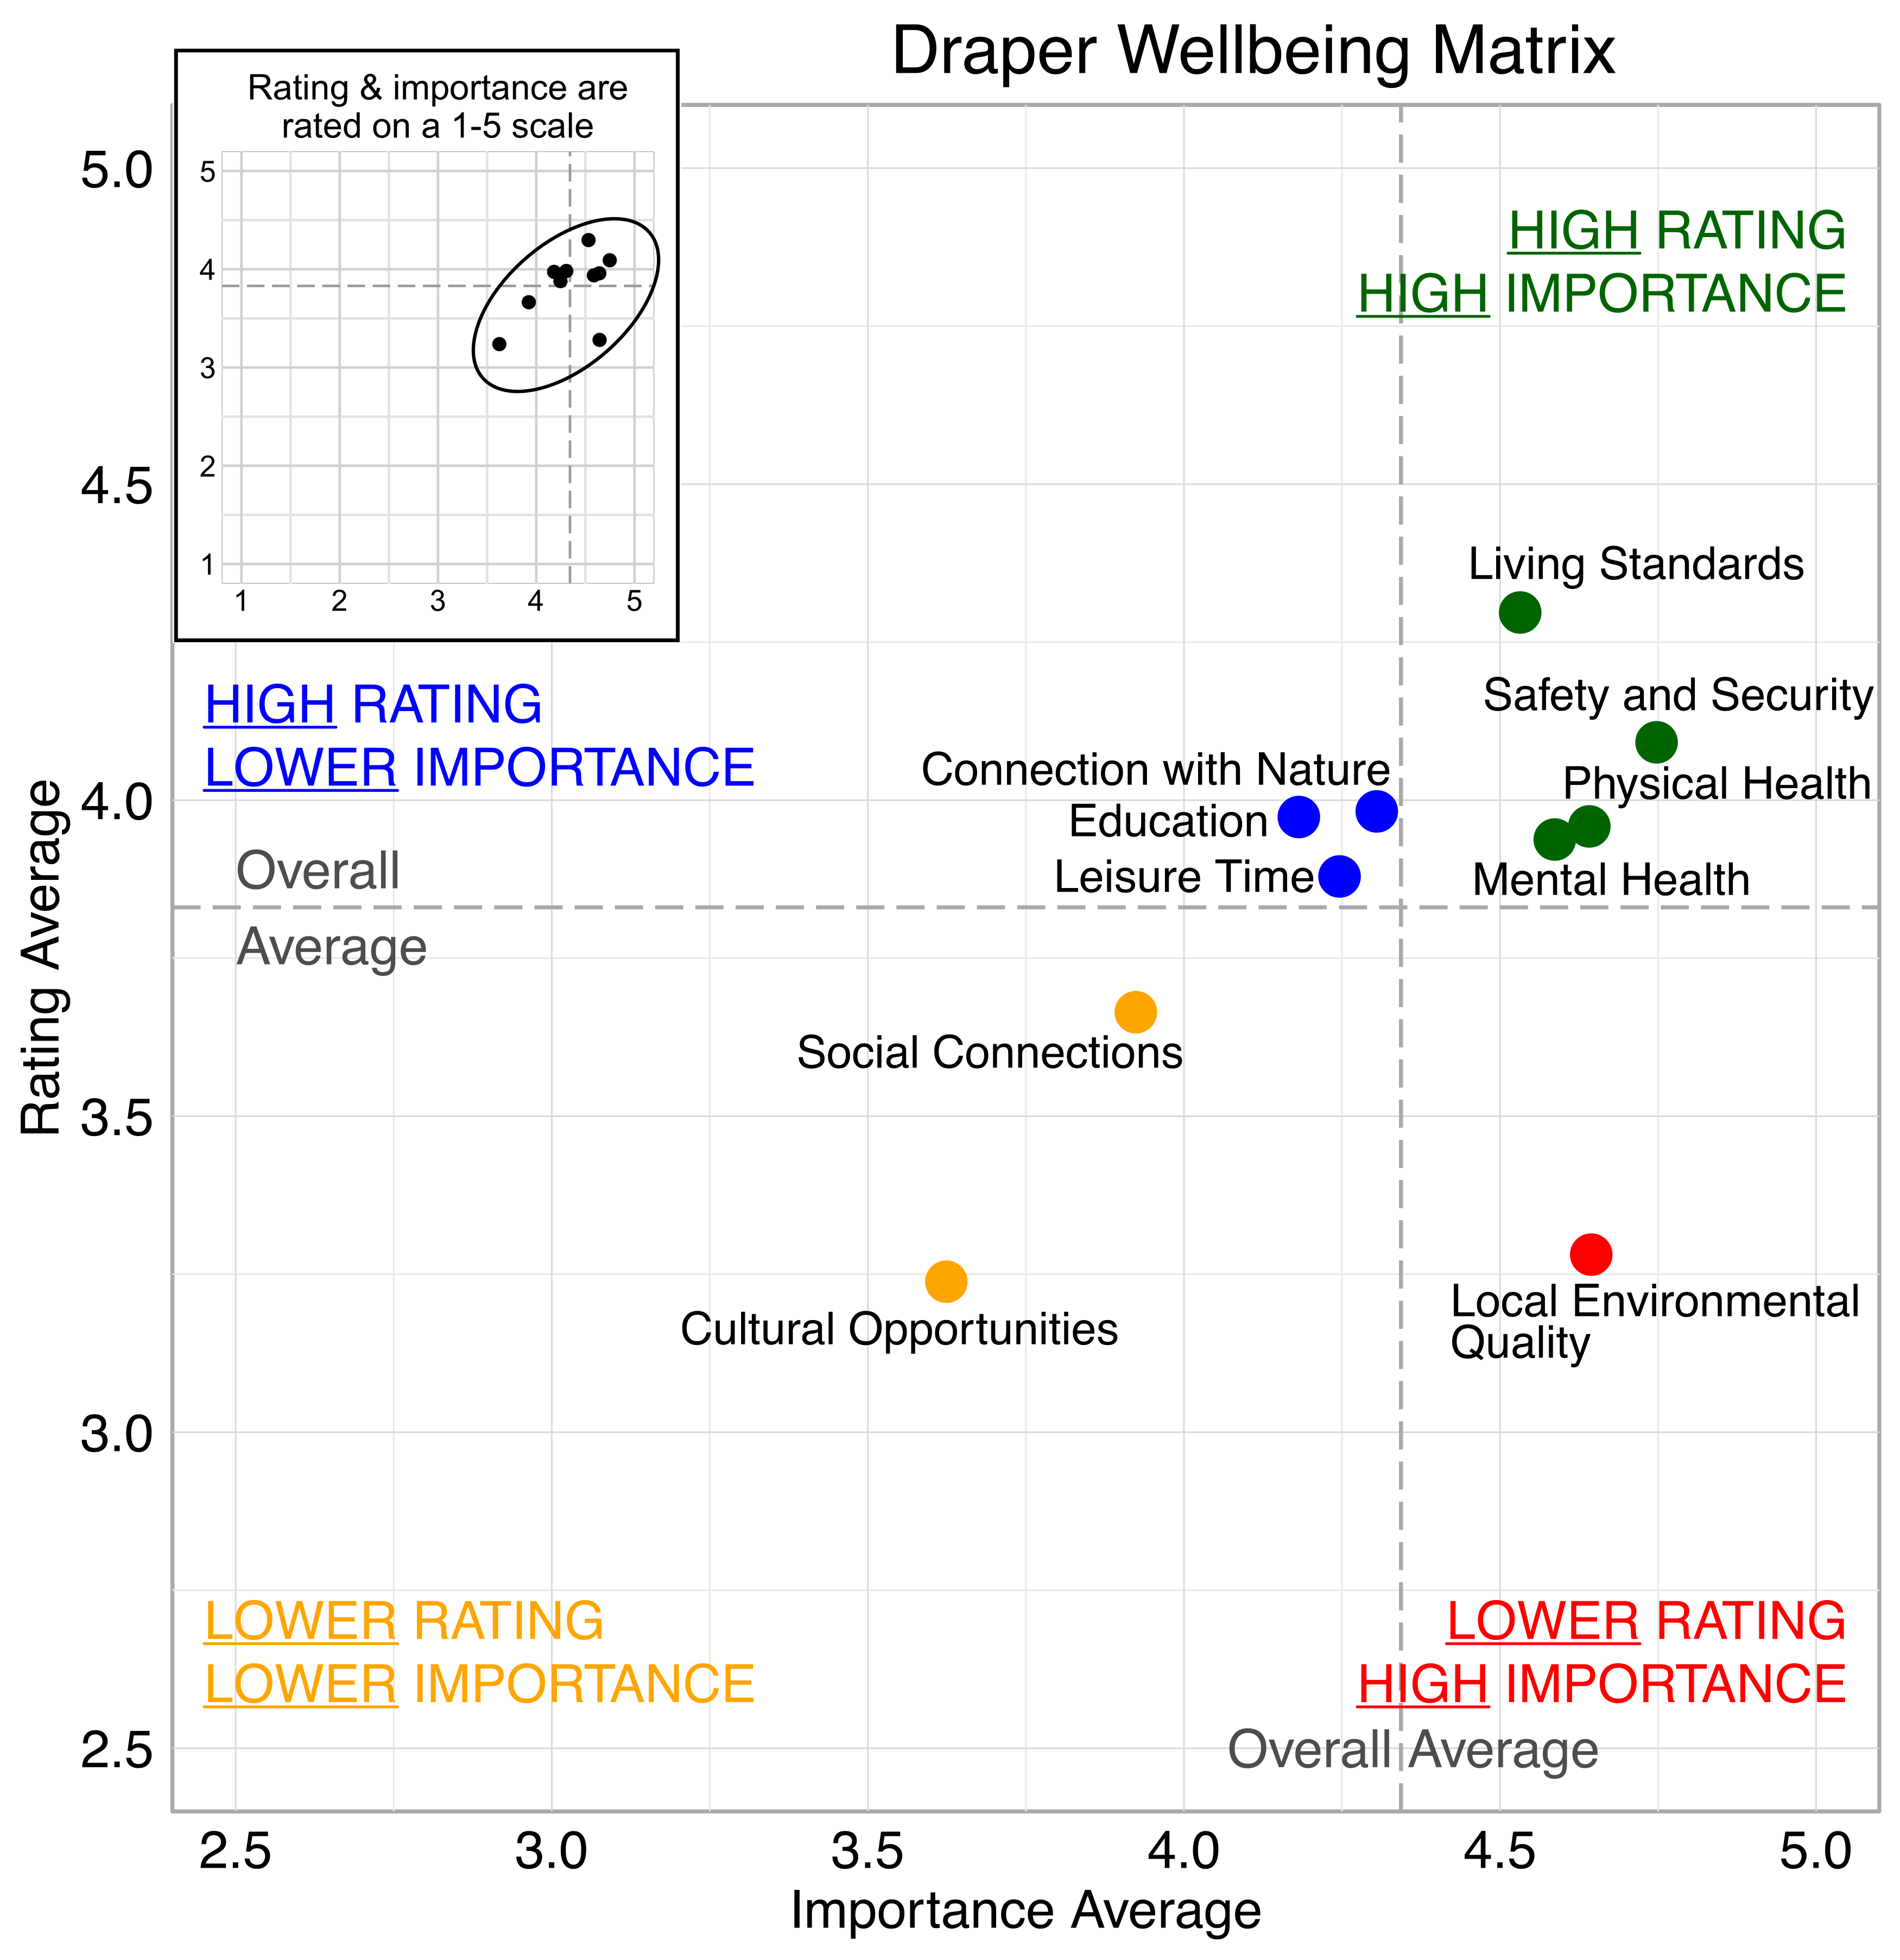 Scatterplot. Title: Draper Wellbeing Matrix. Domains are classified into four quadrants depending on their average rating and average importance as compared to the average of all the average domain ratings and the average of all the average domain importance ratings. High rating, high importance (green quadrant) domains include: Safety and Security, Living Standards, Mental Health, and Physical Health. High rating, lower Importance (blue quadrant) domains include: Education, Leisure Time, and Connection with Nature. Lower rating, lower importance (yellow quadrant) domains include: Social Connections, and Cultural Opportunities. Lower rating, high importance (red quadrant) domains include: Local Environmental Quality.